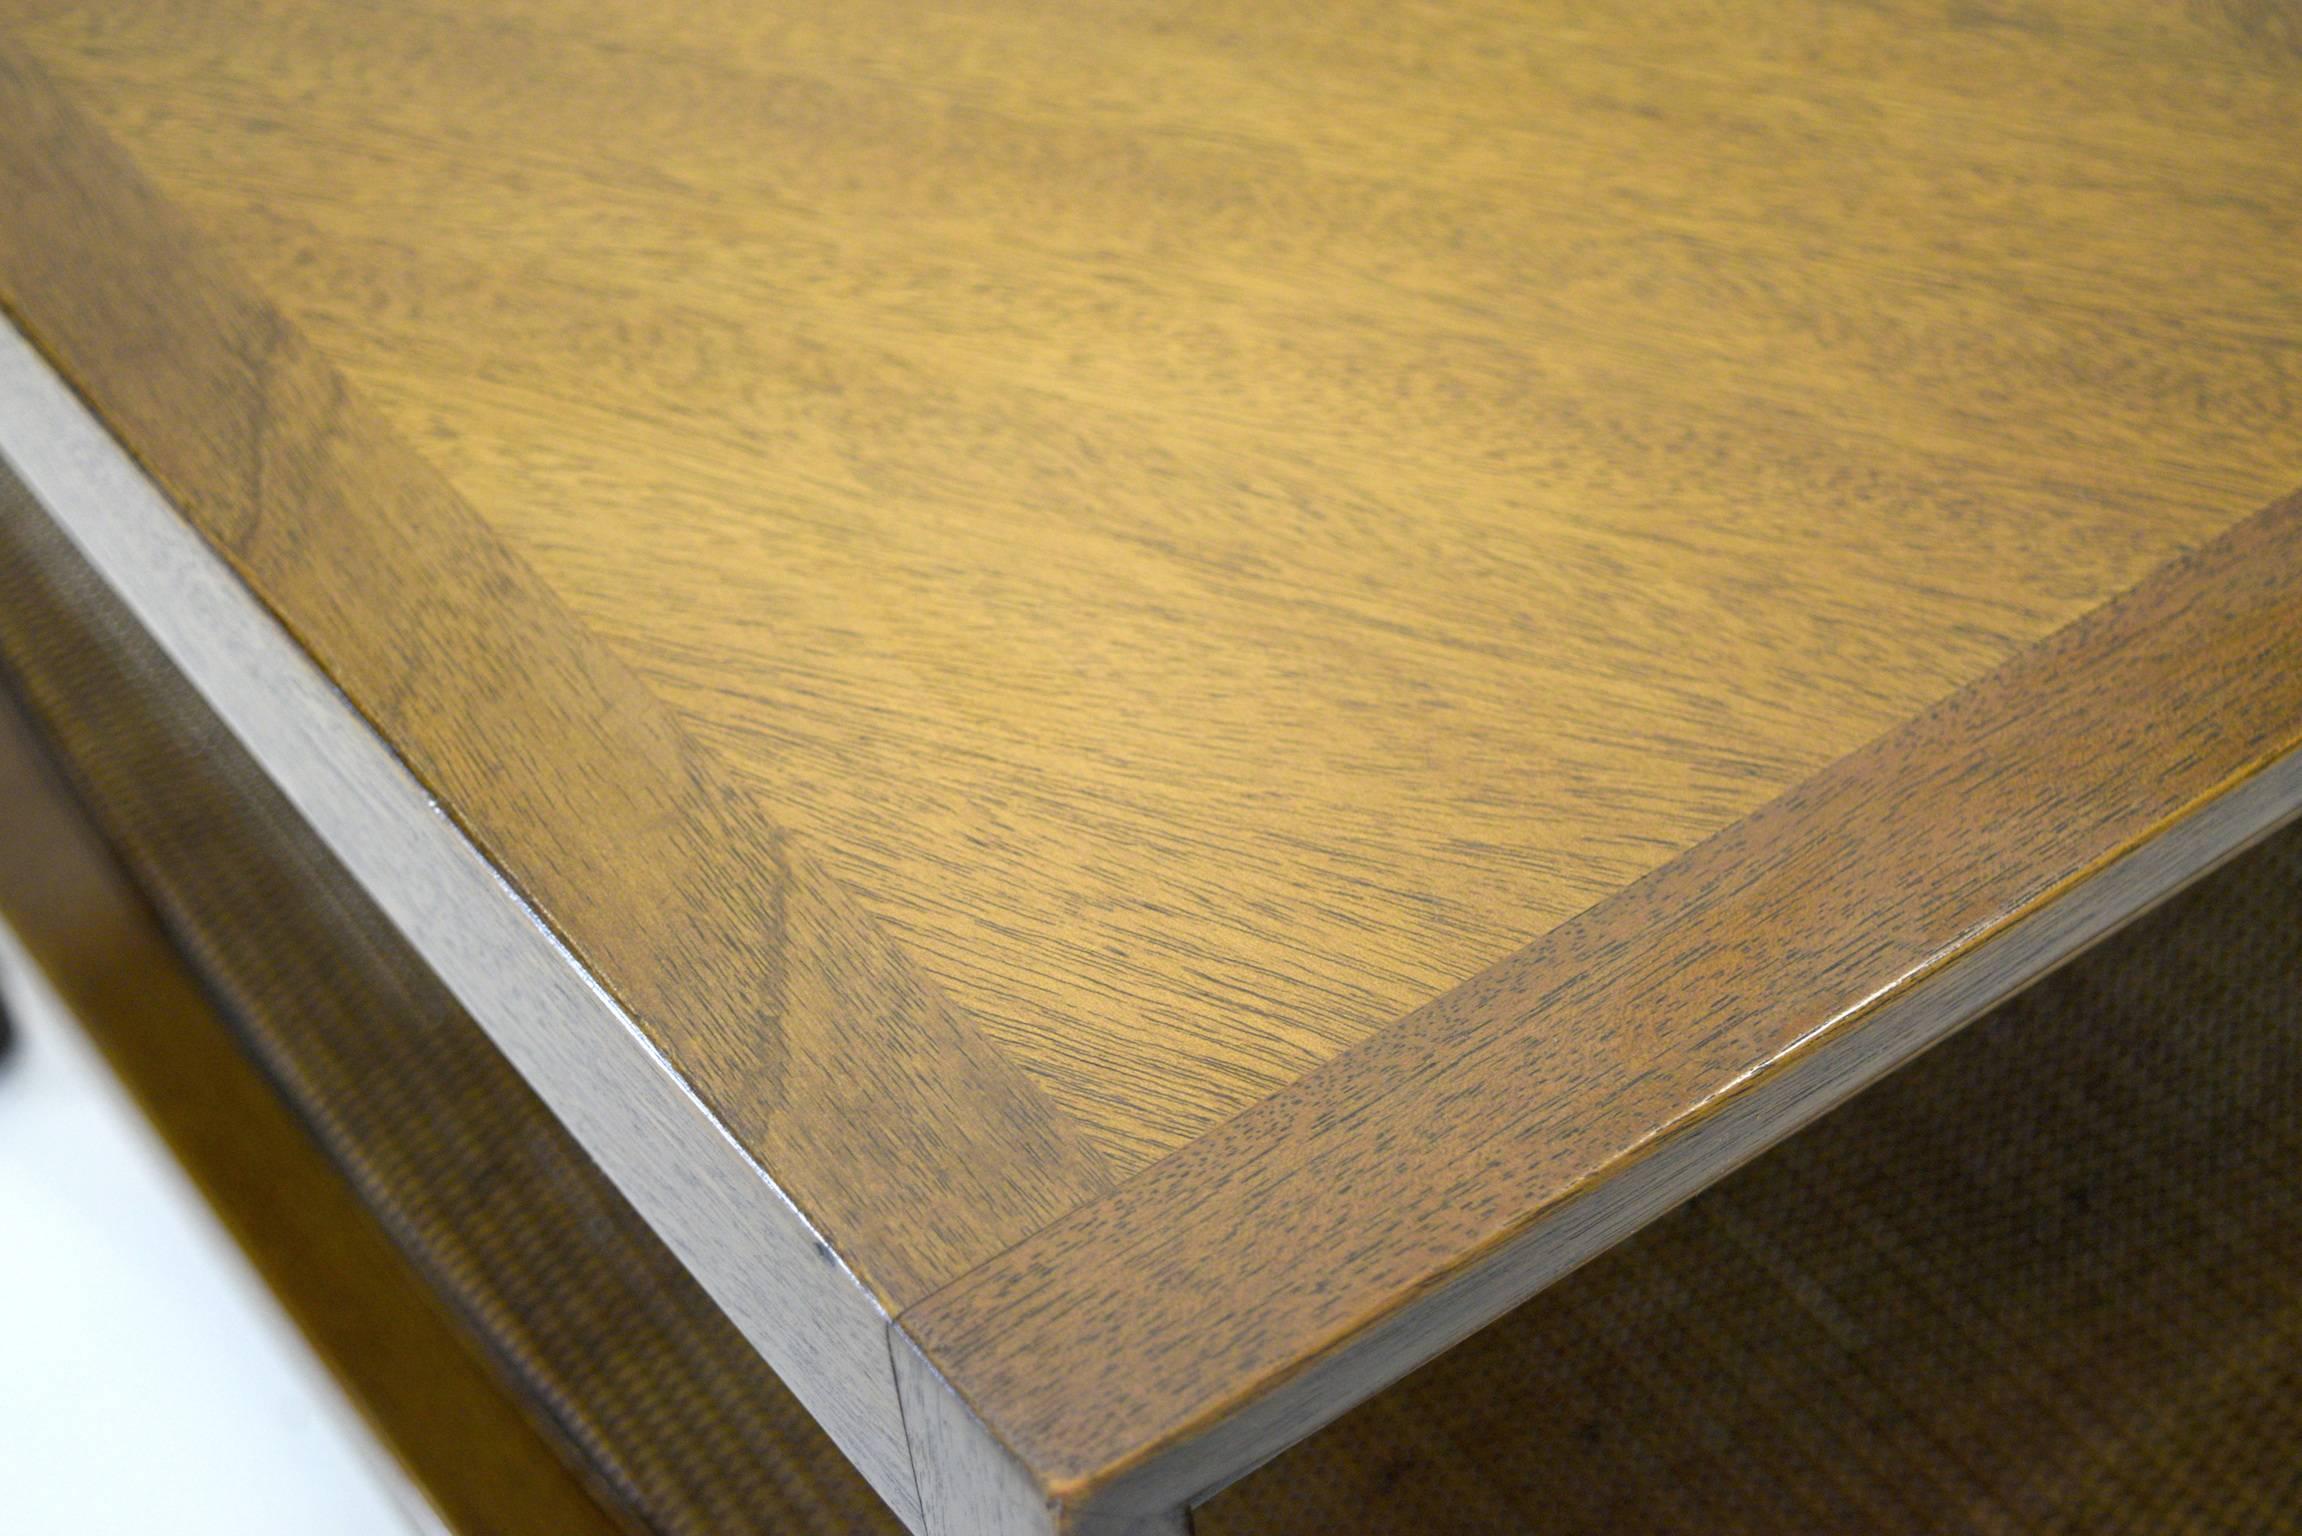 Mid-20th Century Bookmatched Walnut Table by John Widdicomb